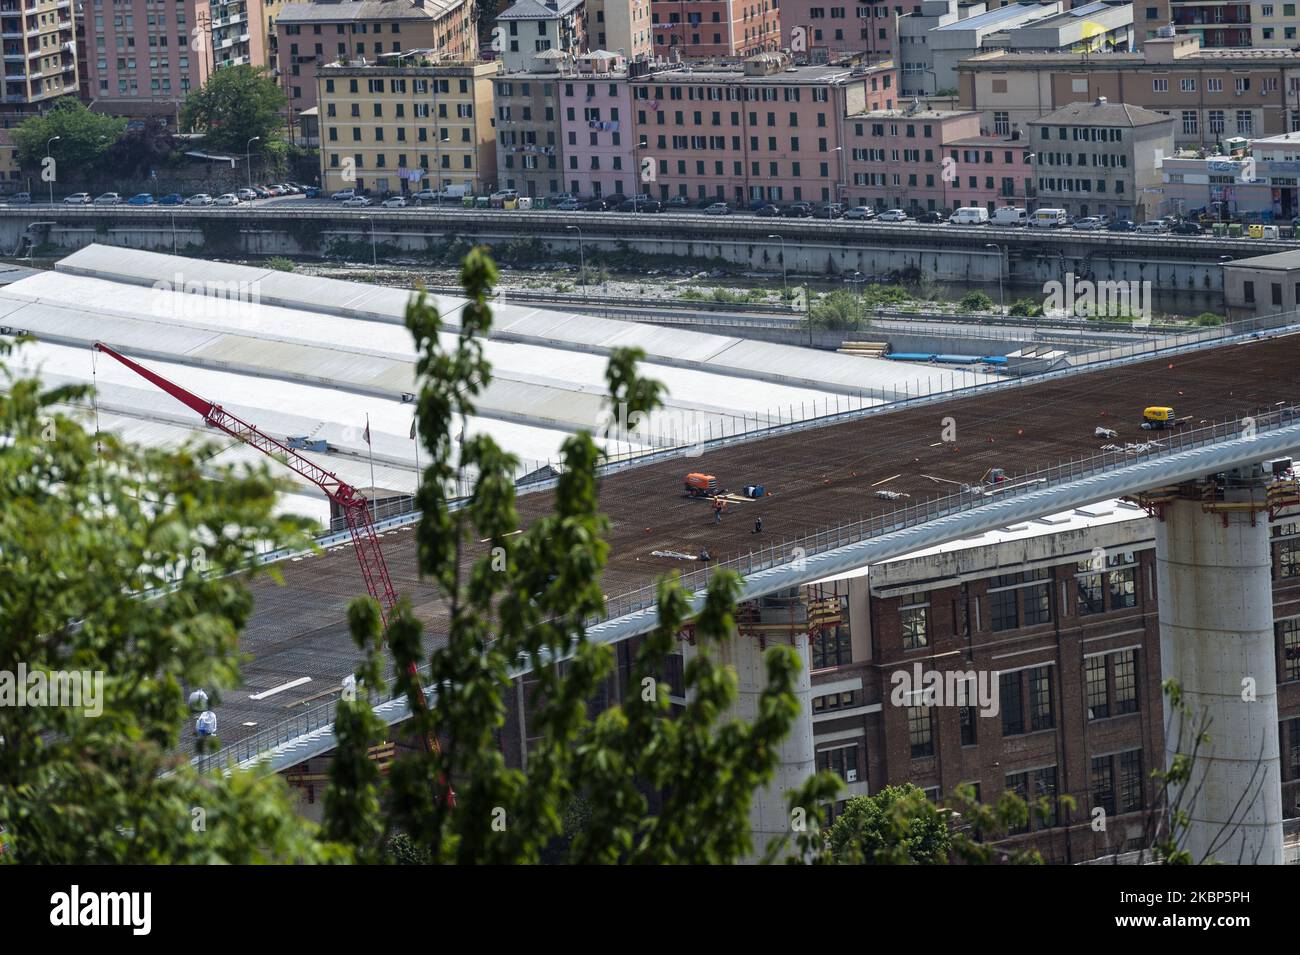 View of the new viaduct that will connect Genoa again from east to west on May 22, 2020 in Genoa, Italy. The new bridge will consist of a steel deck, with a continuous girder of a total length of 1067 meters consisting of 19 spans. The last span of the bridge designed by architect Renzo Piano has just been fixed. (Photo by Fabrizio Di Nucci/NurPhoto) Stock Photo